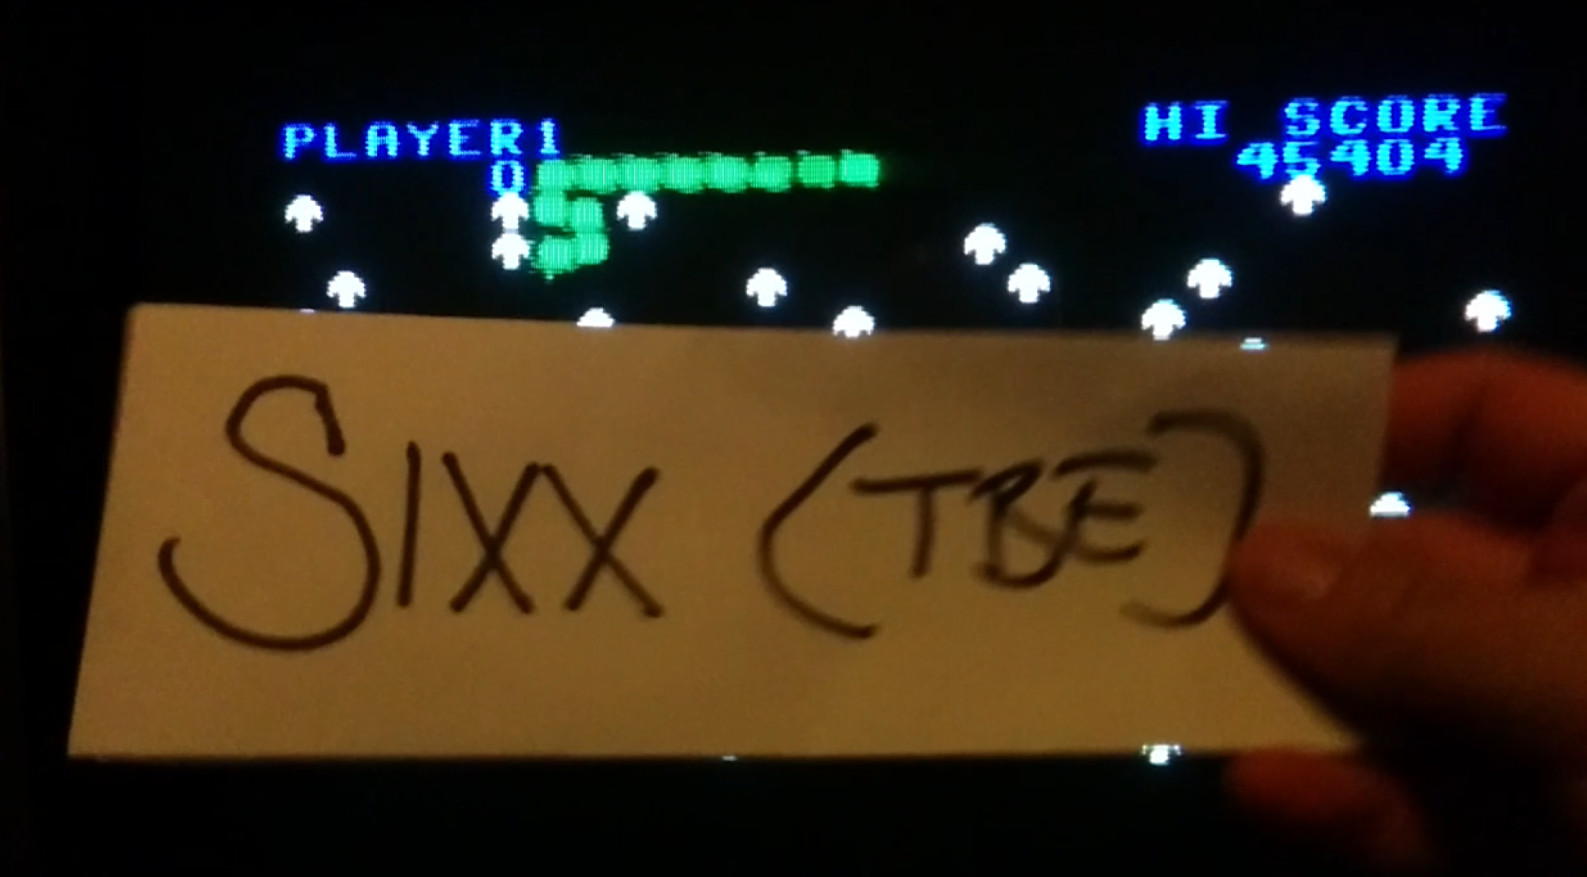 Sixx: Centipede: Easy (Colecovision Emulated) 45,404 points on 2014-05-20 18:30:11